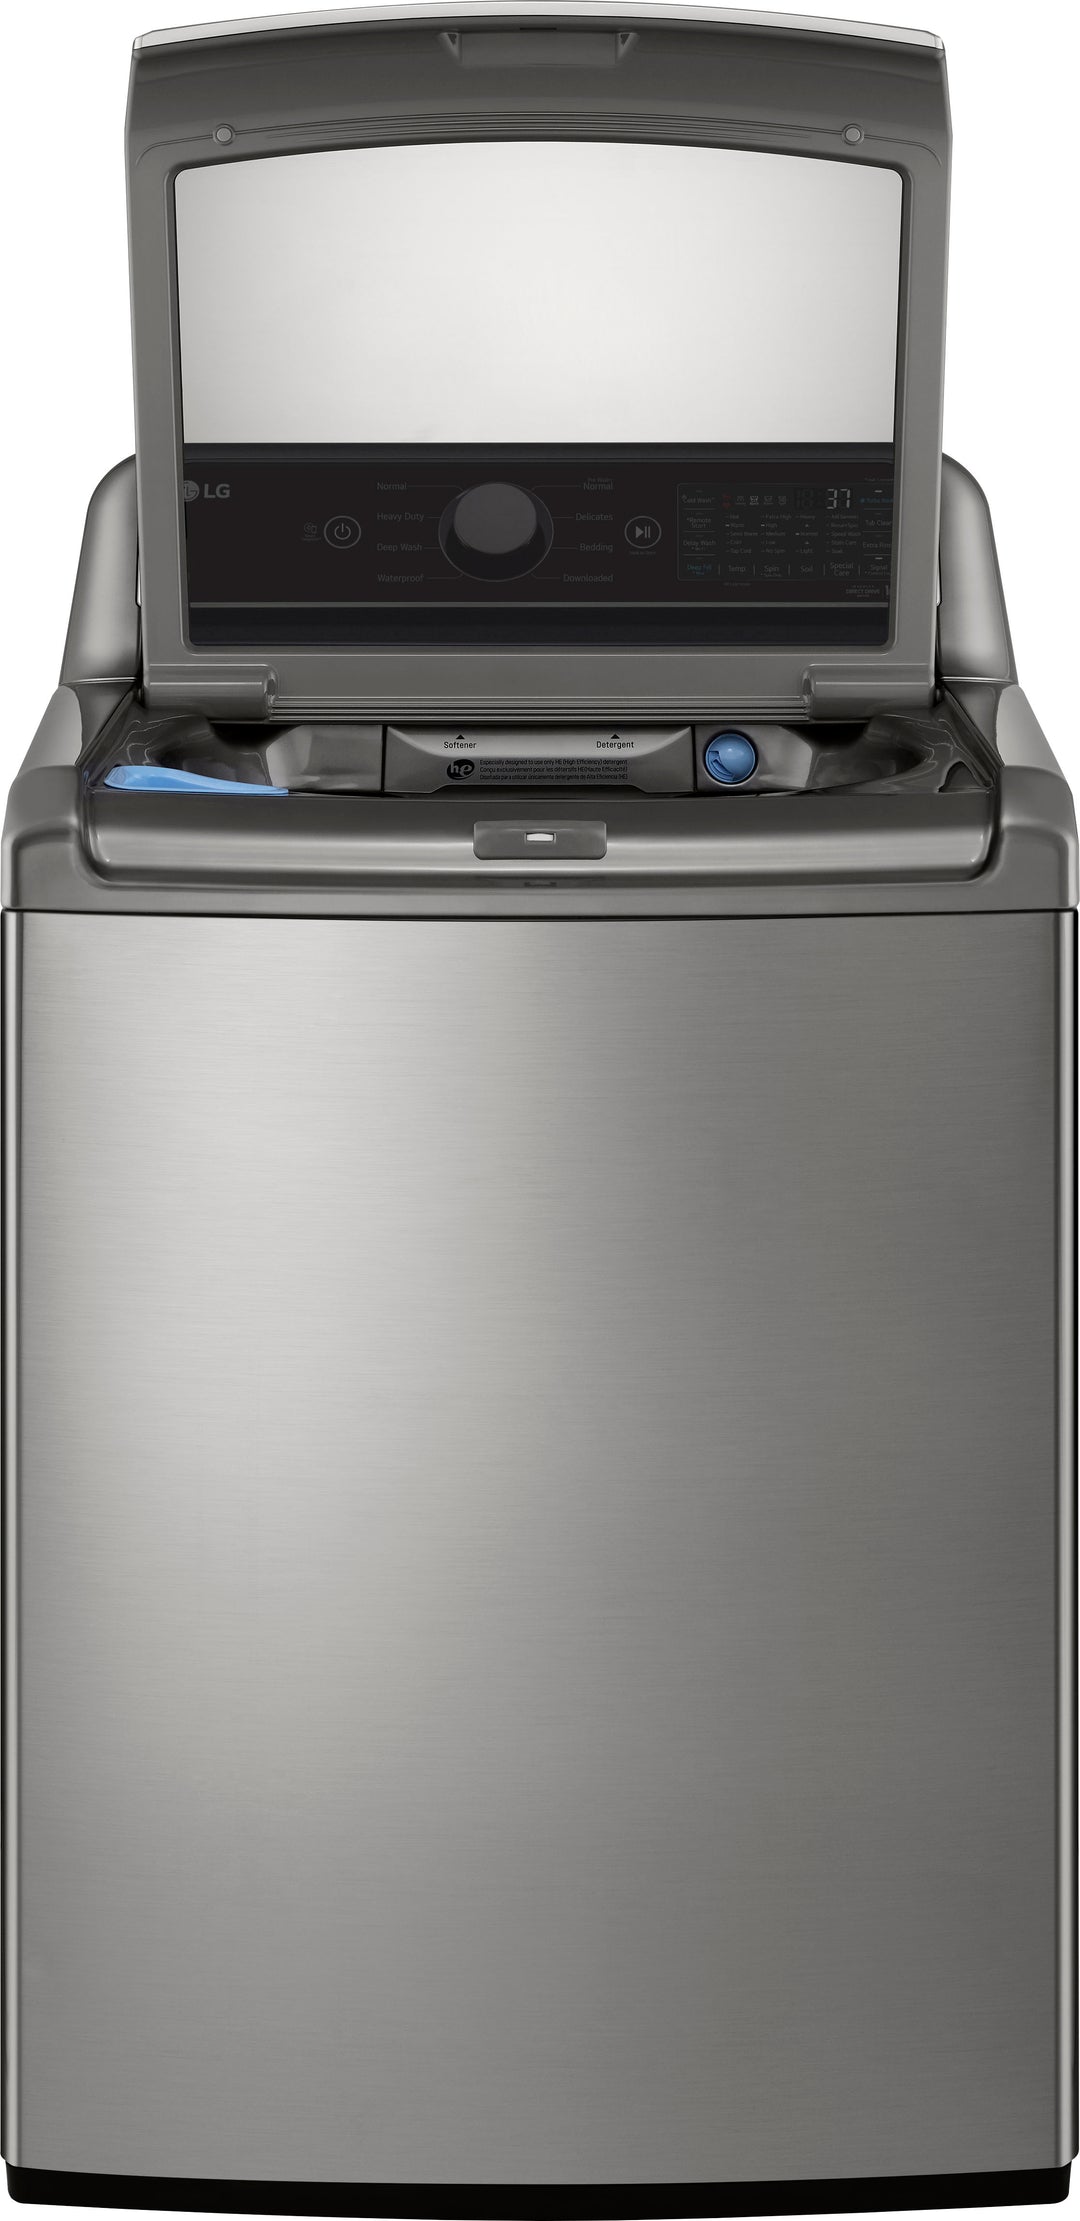 LG - 5.3 Cu. Ft. High-Efficiency Smart Top Load Washer with 4-Way Agitator and TurboWash3D - Graphite steel_7